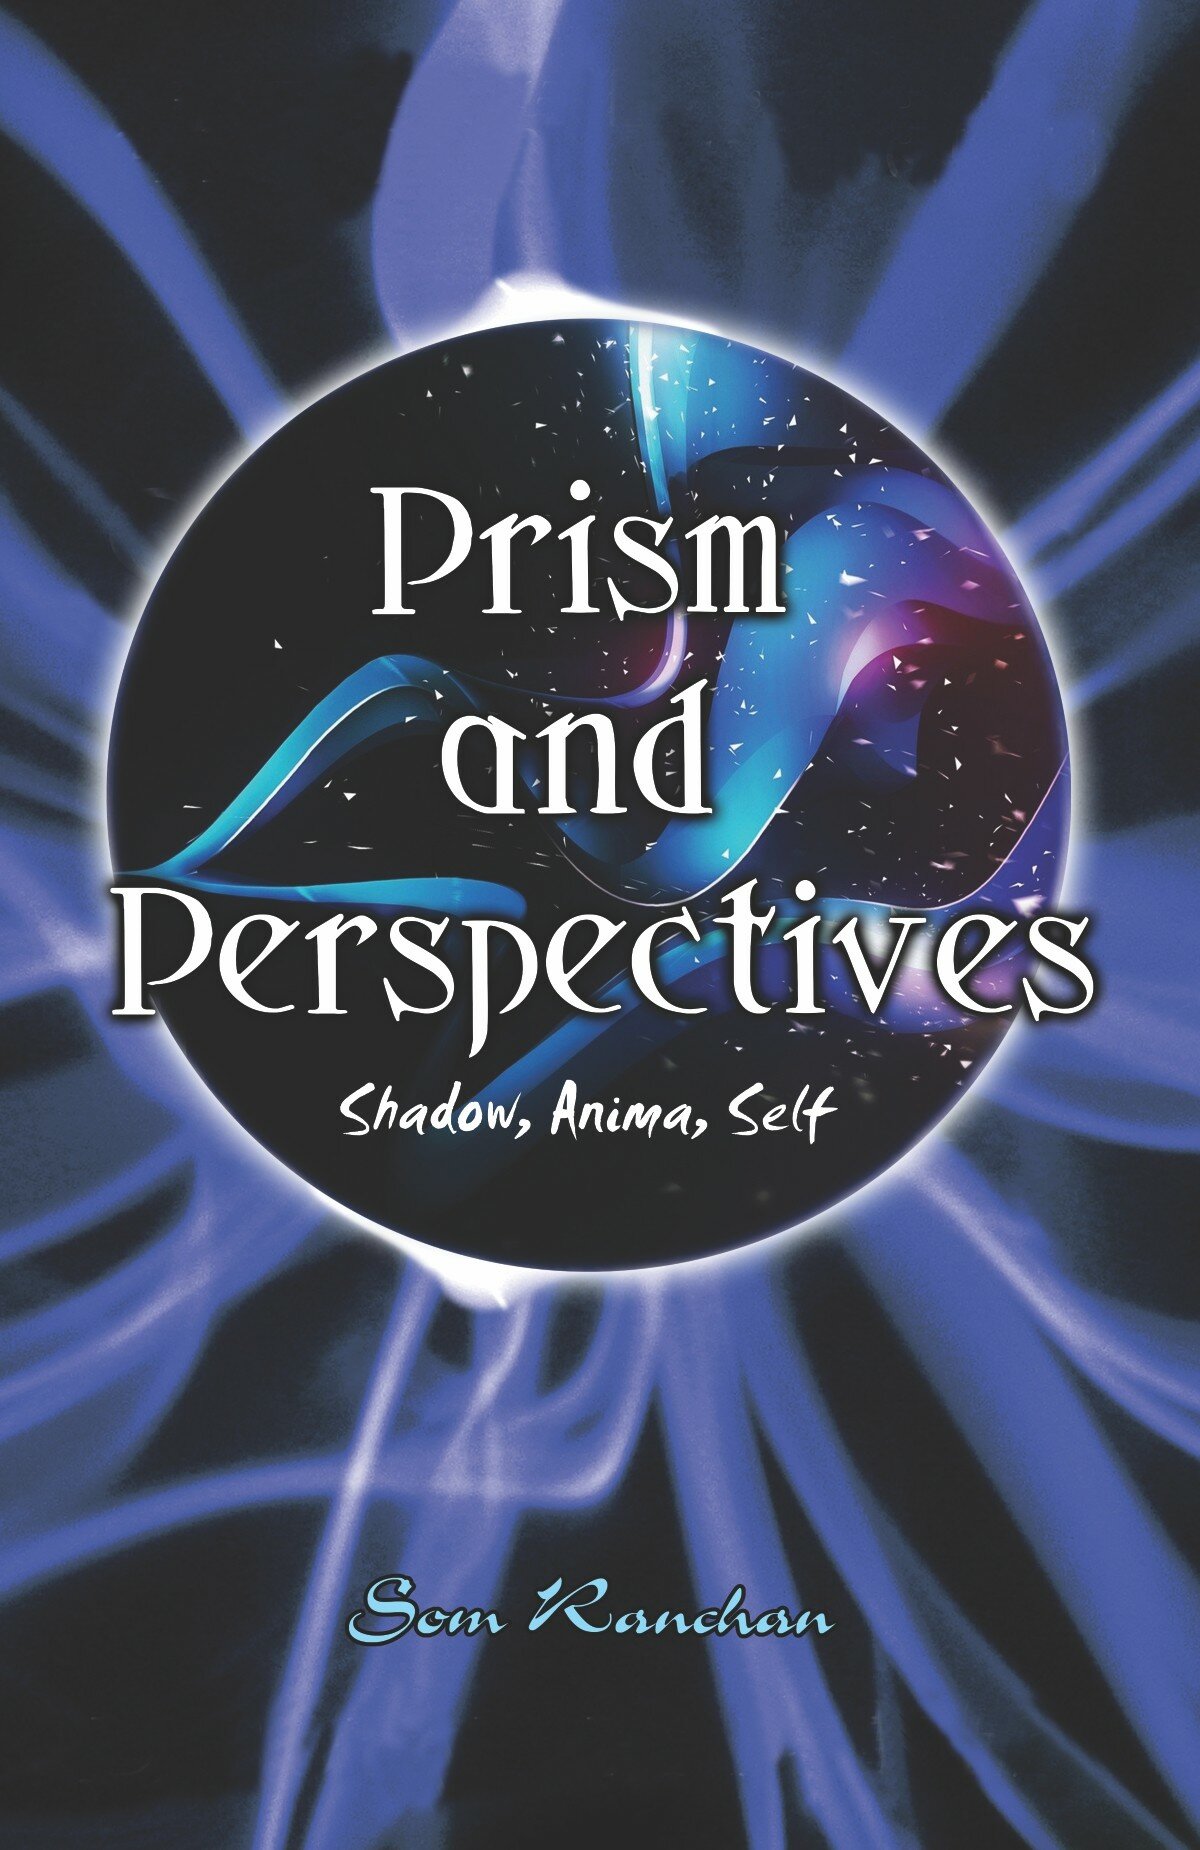 Prism and Perspective